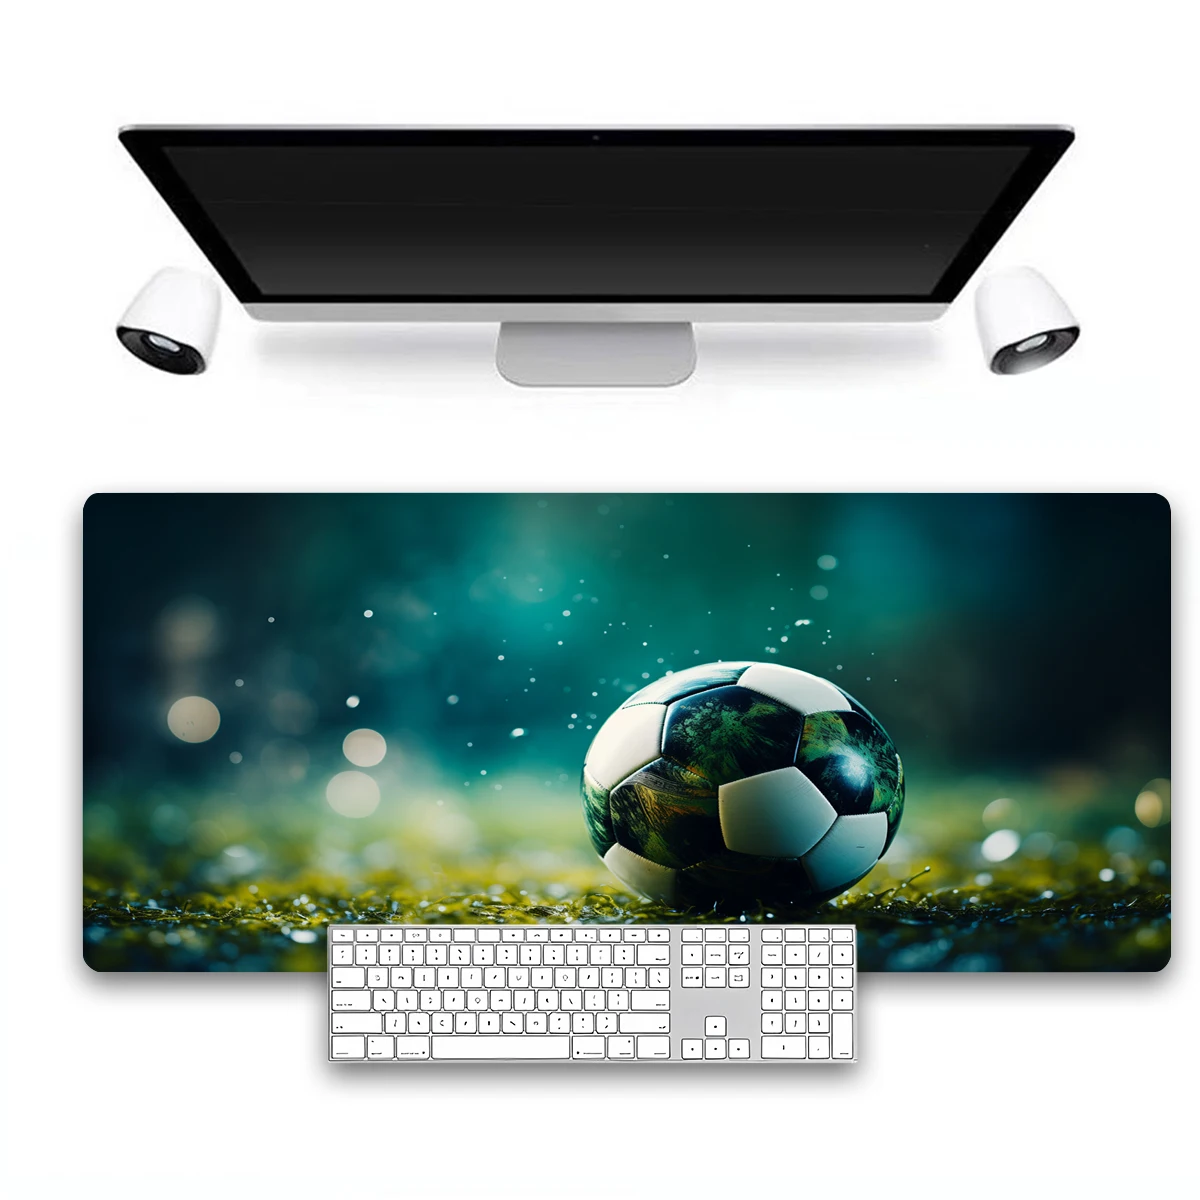 

Soccer Mouse Pad Large Desk Mat Non-Slip Rubber Base Gaming Mouse Pad,Long Game Computer Keyboard Pad with Stitched Edges Home